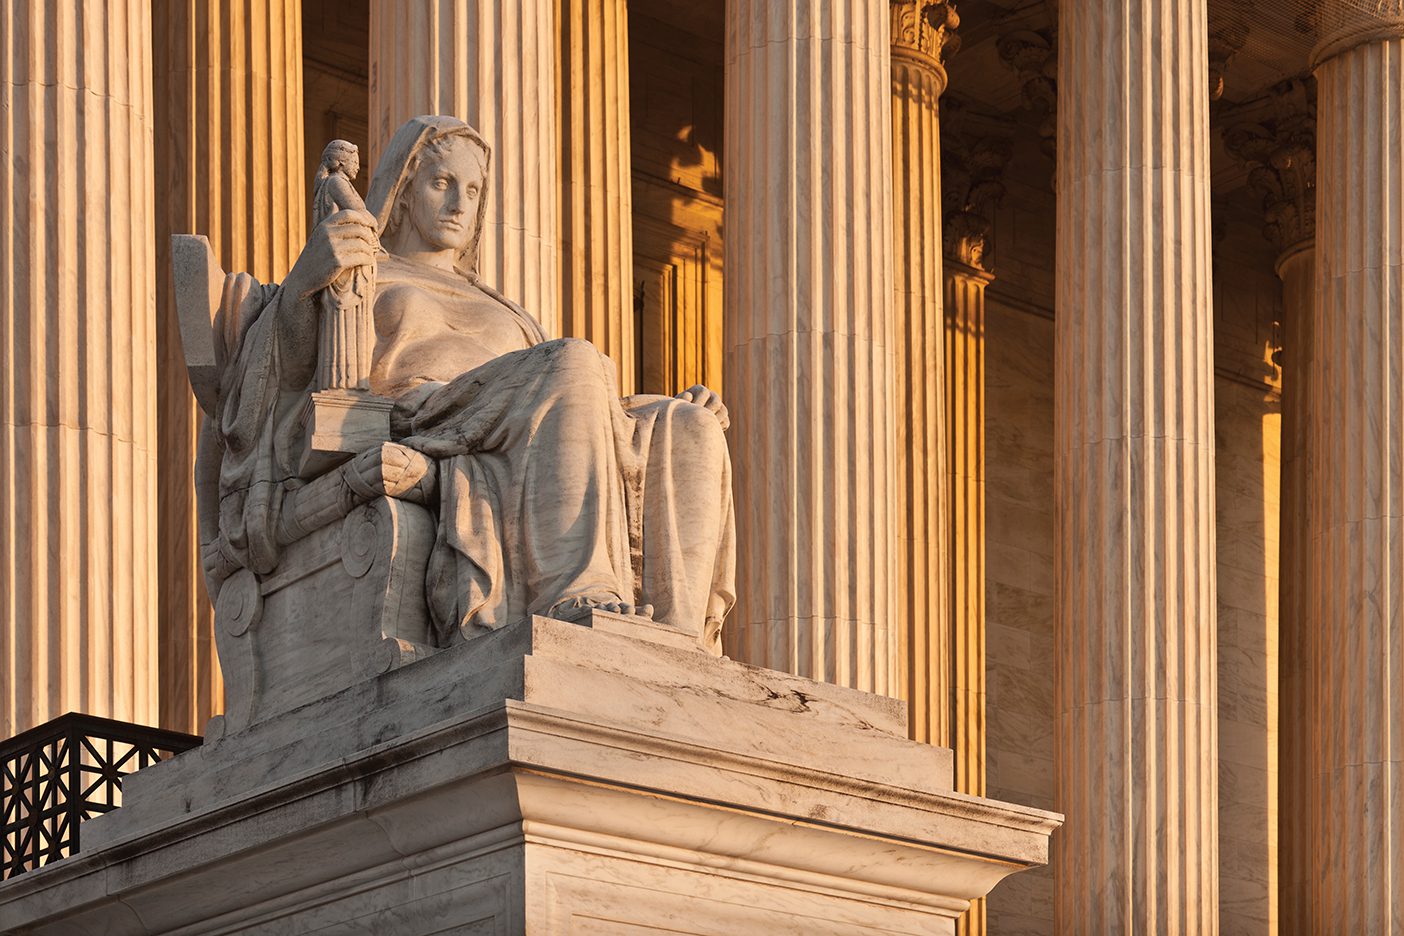 A marble statue outside the U.S. Supreme Court of a woman sitting in a chair acting as a judge.